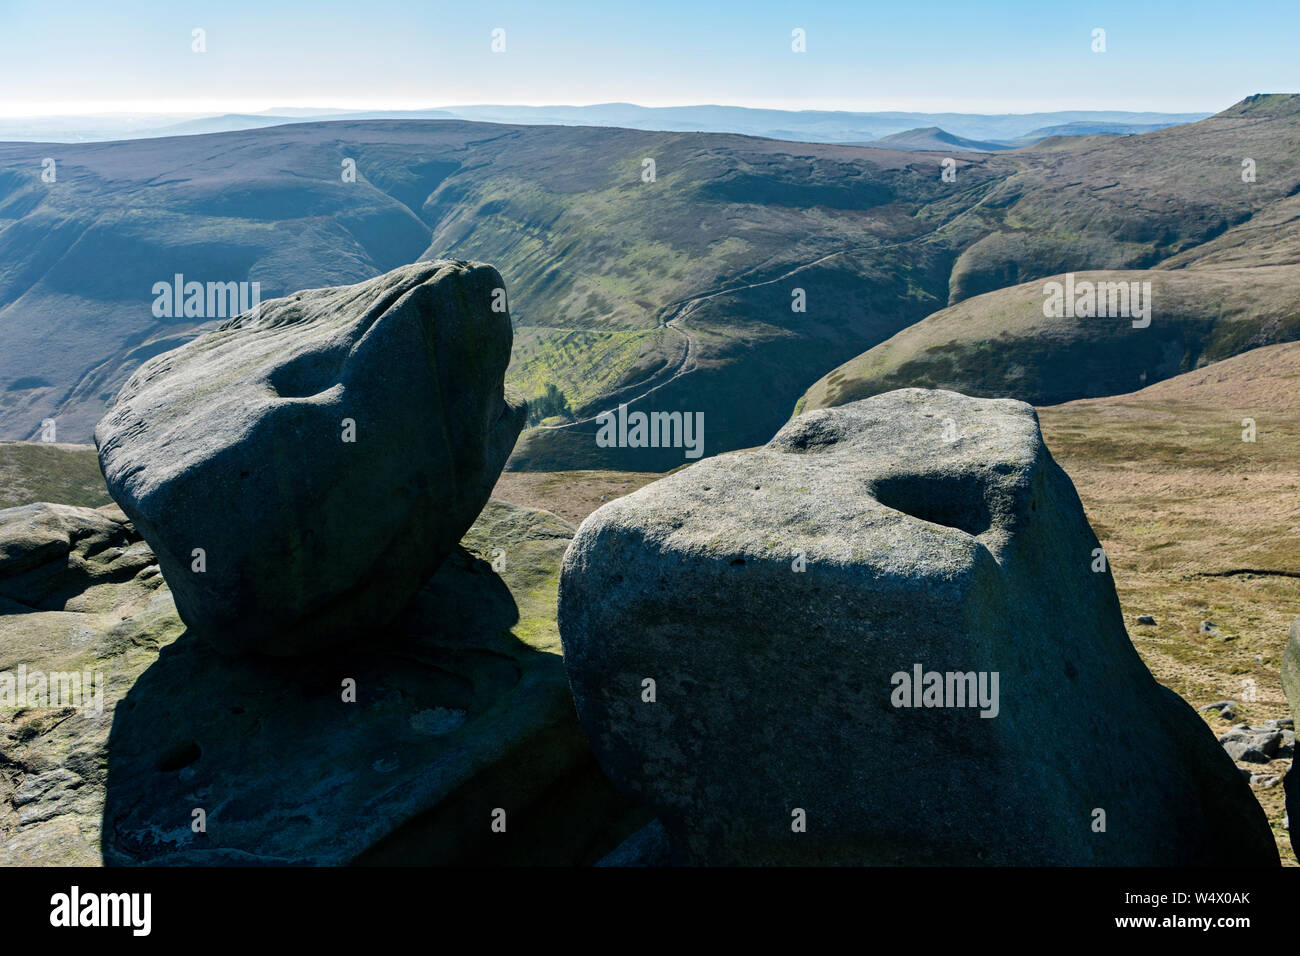 The head of Edale from the Wool Packs rocks on the Kinder Scout plateau above Edale, Peak District, Derbyshire, England, UK Stock Photo